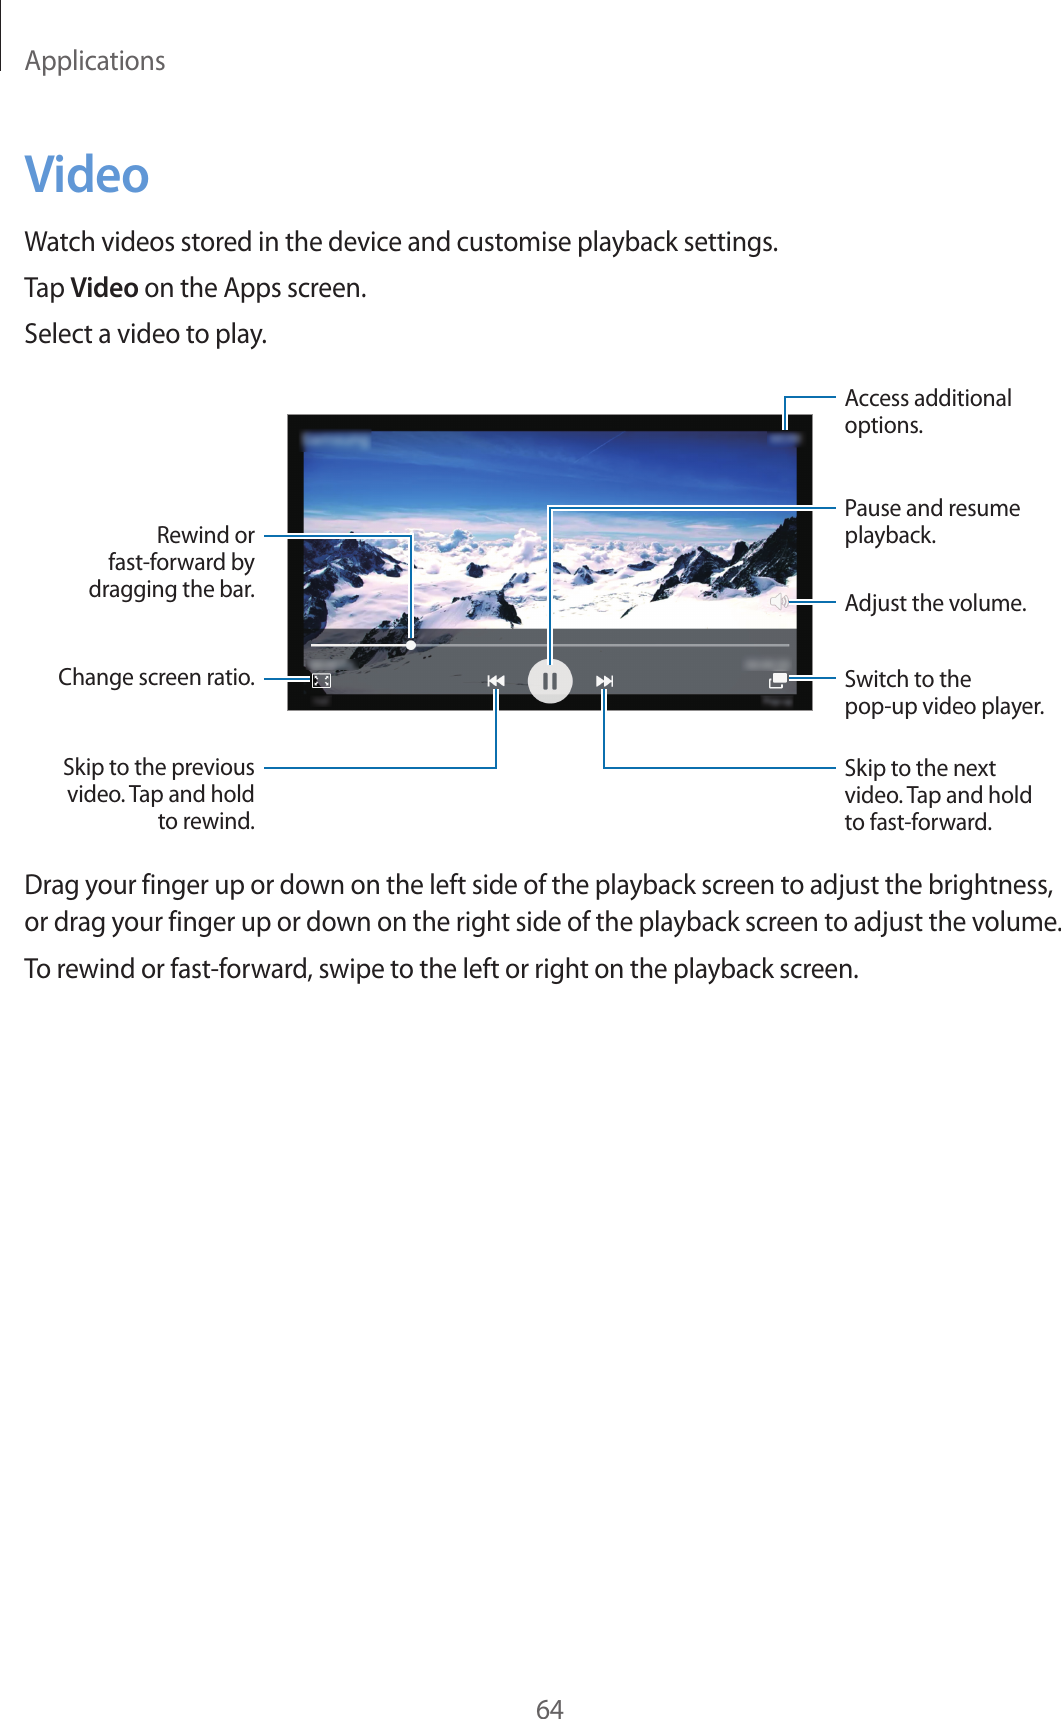 Applications64VideoWatch videos stored in the device and customise playback settings.Tap Video on the Apps screen.Select a video to play.Change screen ratio.Rewind or fast-forward by dragging the bar.Skip to the previous video. Tap and hold to rewind.Skip to the next video. Tap and hold to fast-forward.Access additional options.Pause and resume playback.Switch to the pop-up video player.Adjust the volume.Drag your finger up or down on the left side of the playback screen to adjust the brightness, or drag your finger up or down on the right side of the playback screen to adjust the volume.To rewind or fast-forward, swipe to the left or right on the playback screen.